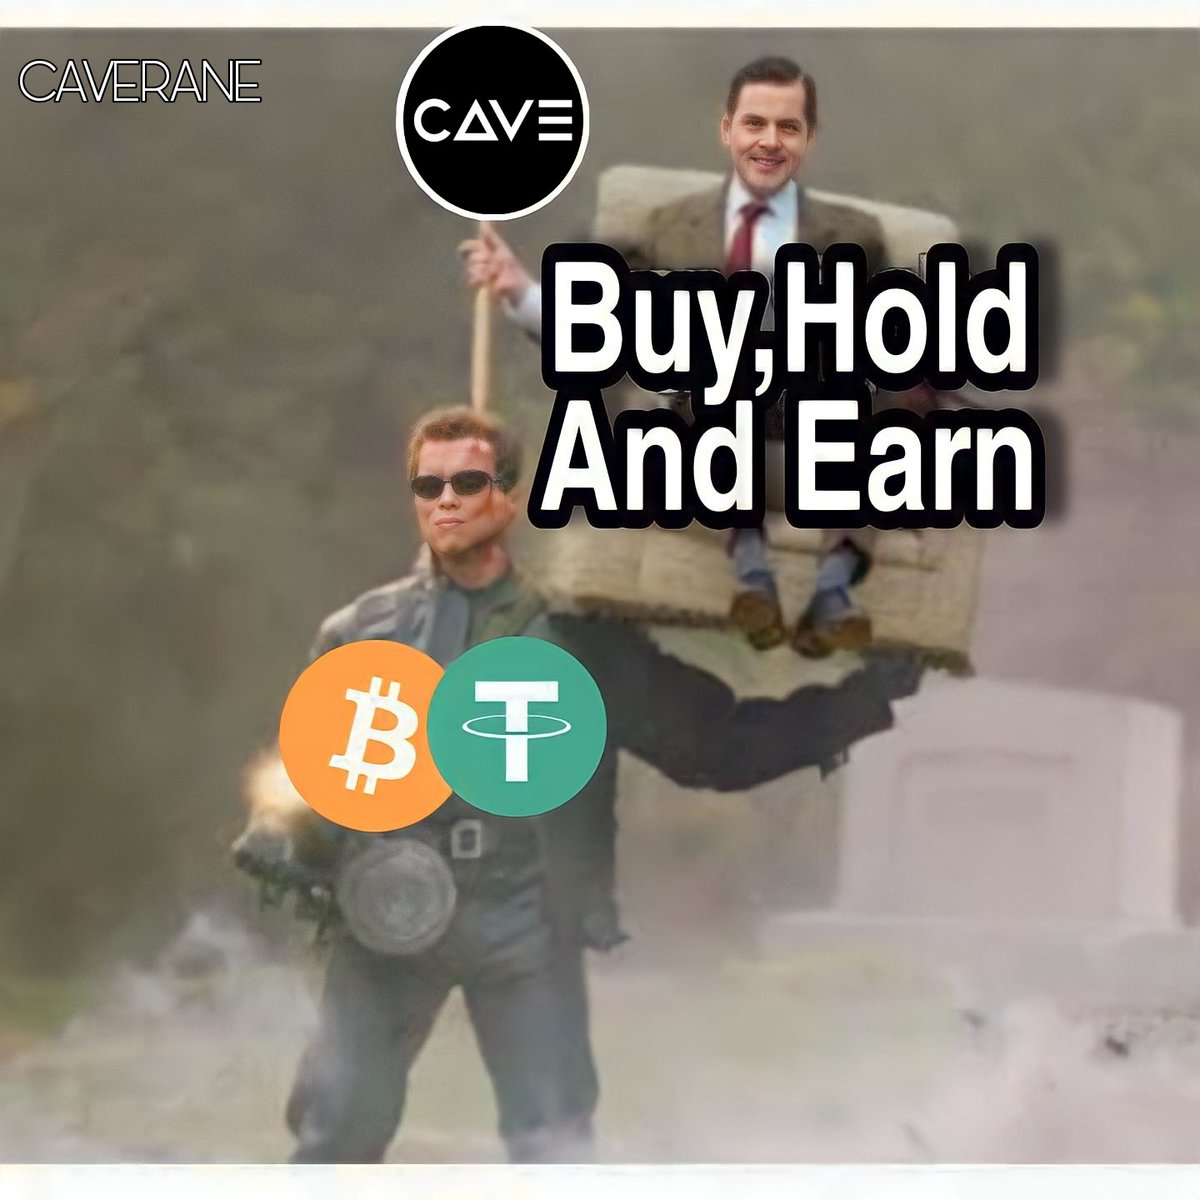 @Cave_DAO My entry  
@Cave_DAO  
#CAVERAVE